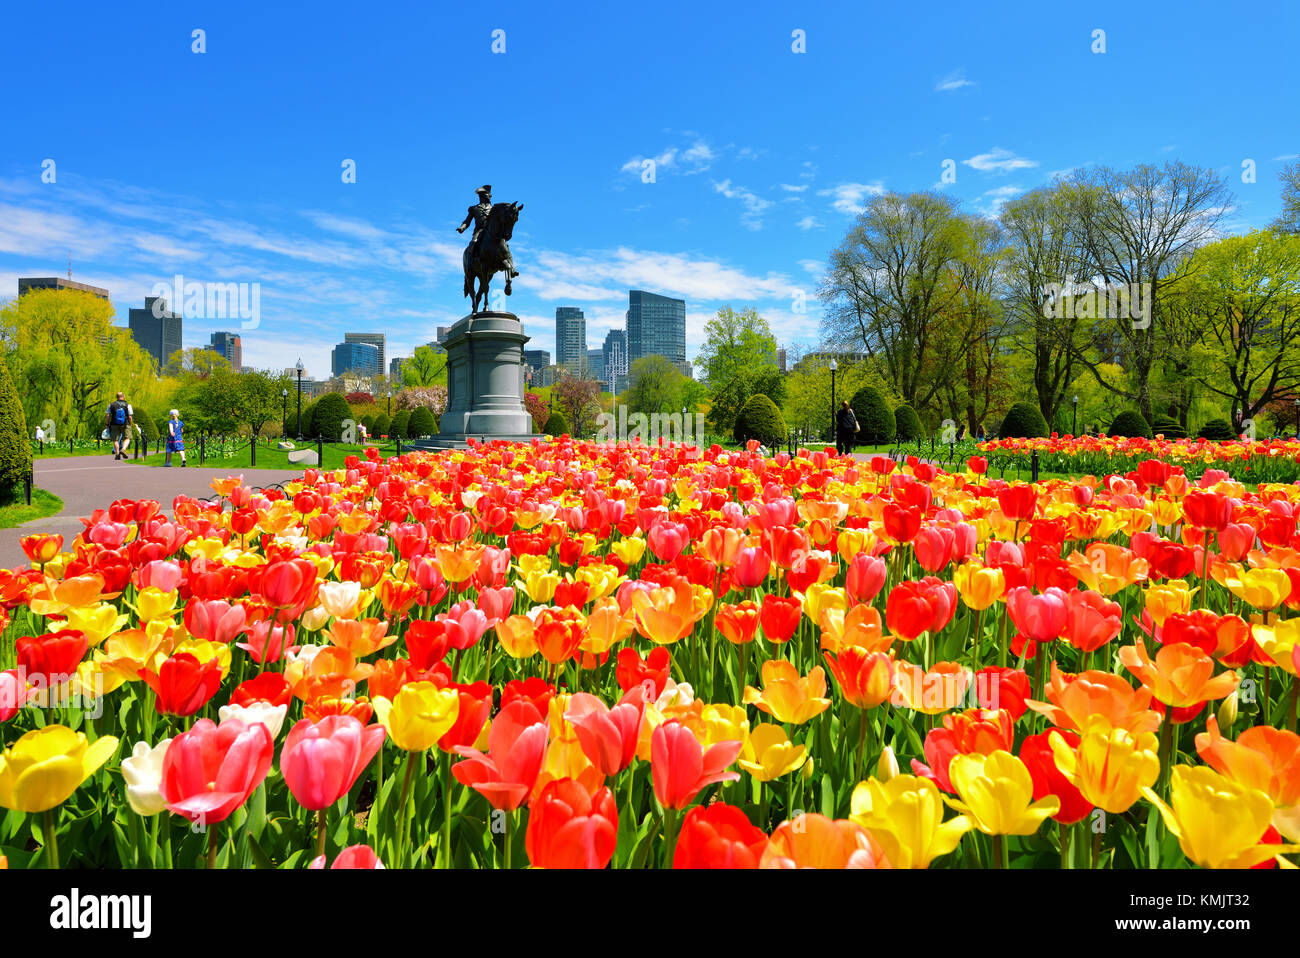 Boston Public Garden and city skyline on a beautiful spring day. Colorful tulips planted in mass in front  of George Washington statue. Stock Photo